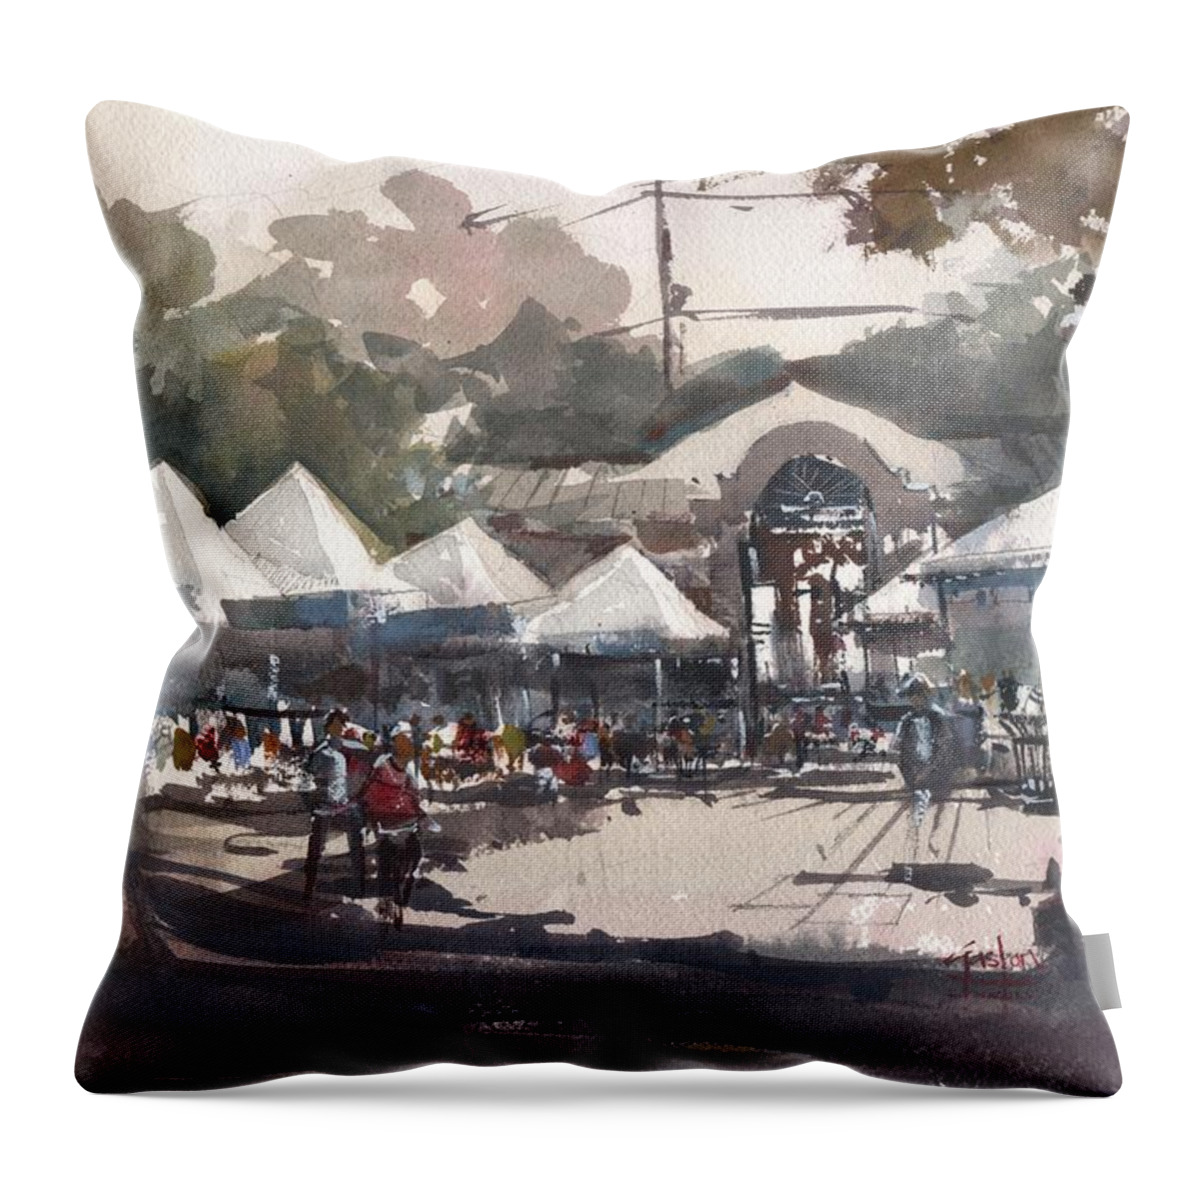 Tampa Throw Pillow featuring the painting Ybor Saturday Market by Gaston McKenzie